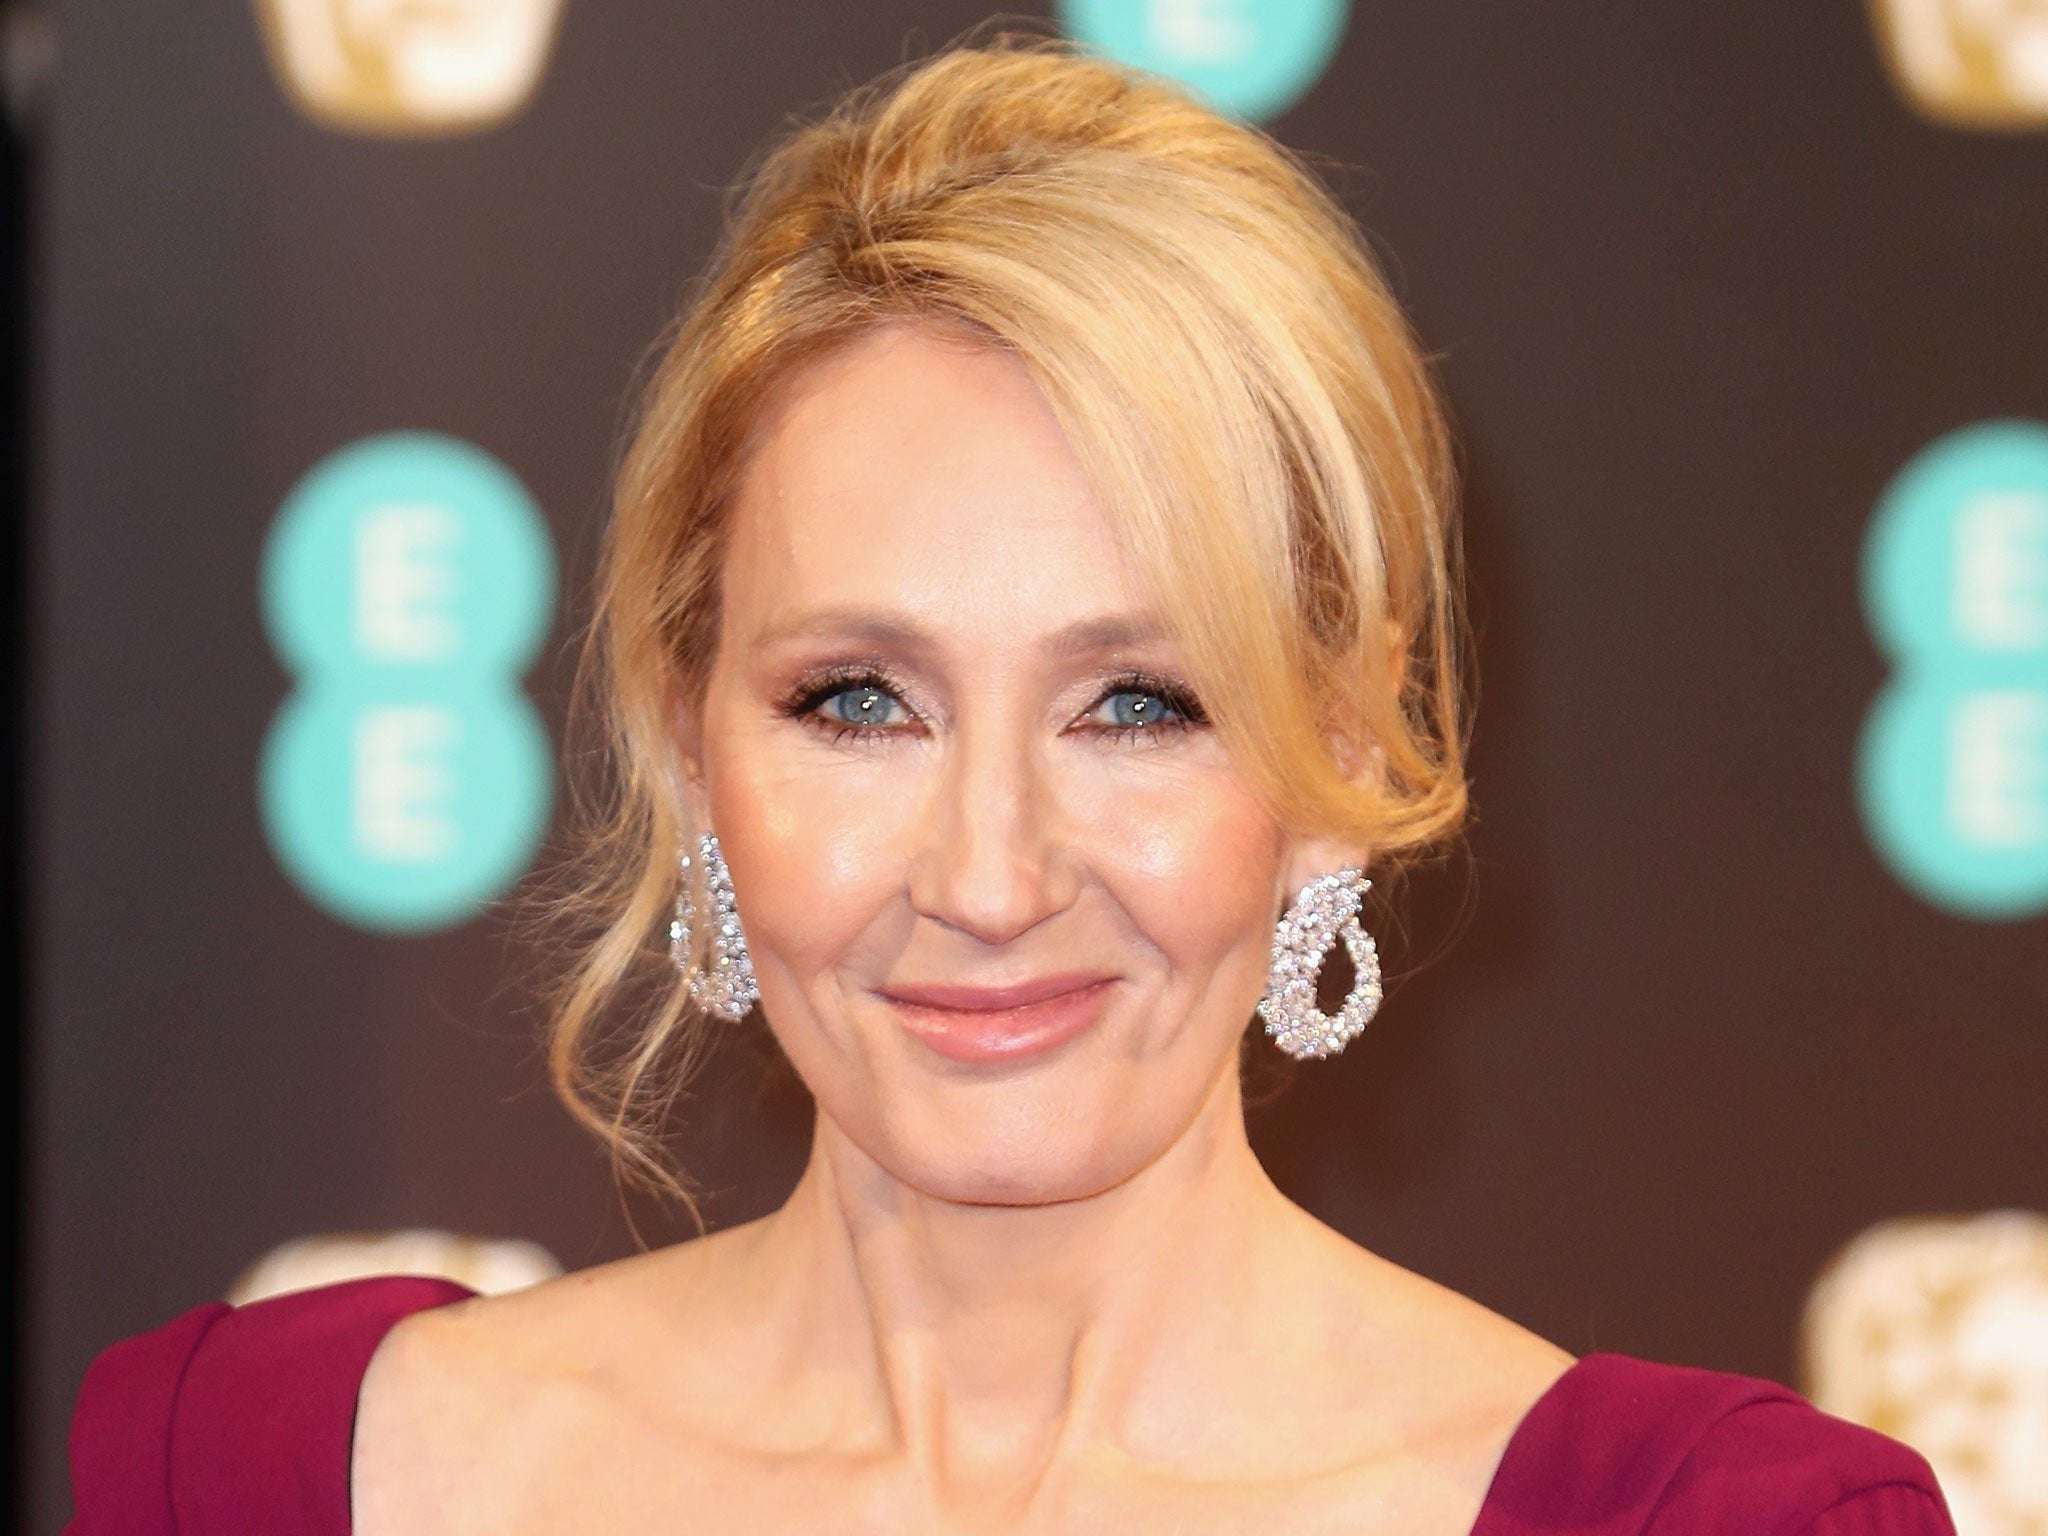 image for JK Rowling donates £15.3m to the University of Edinburgh for MS research